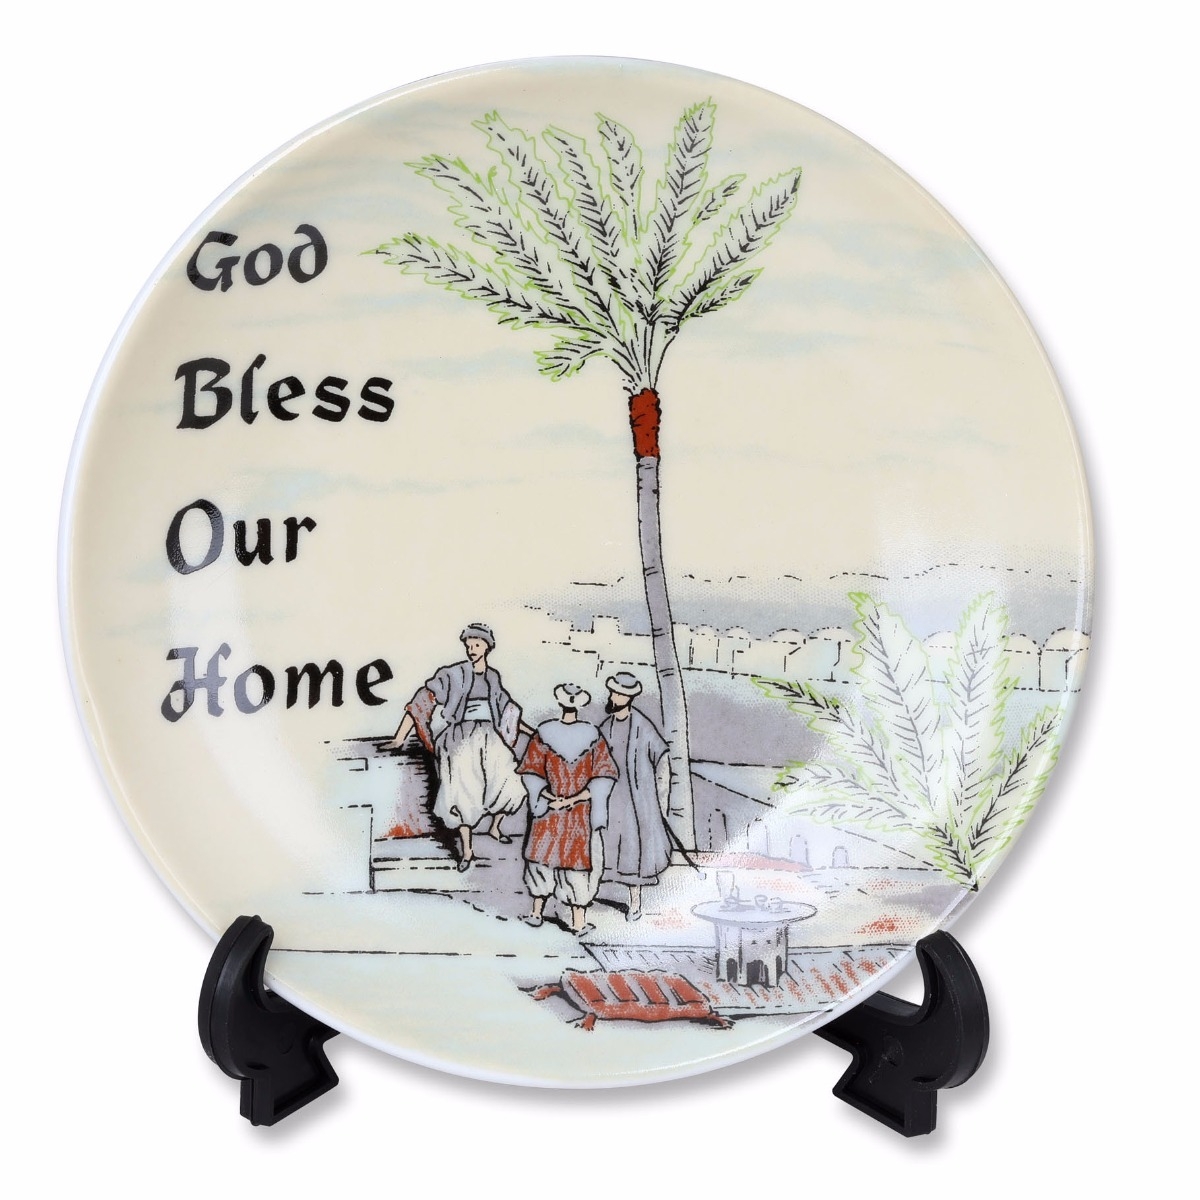 Righteous Men under a Palm Tree: Home Blessing Decorative Ceramic Plate - 1